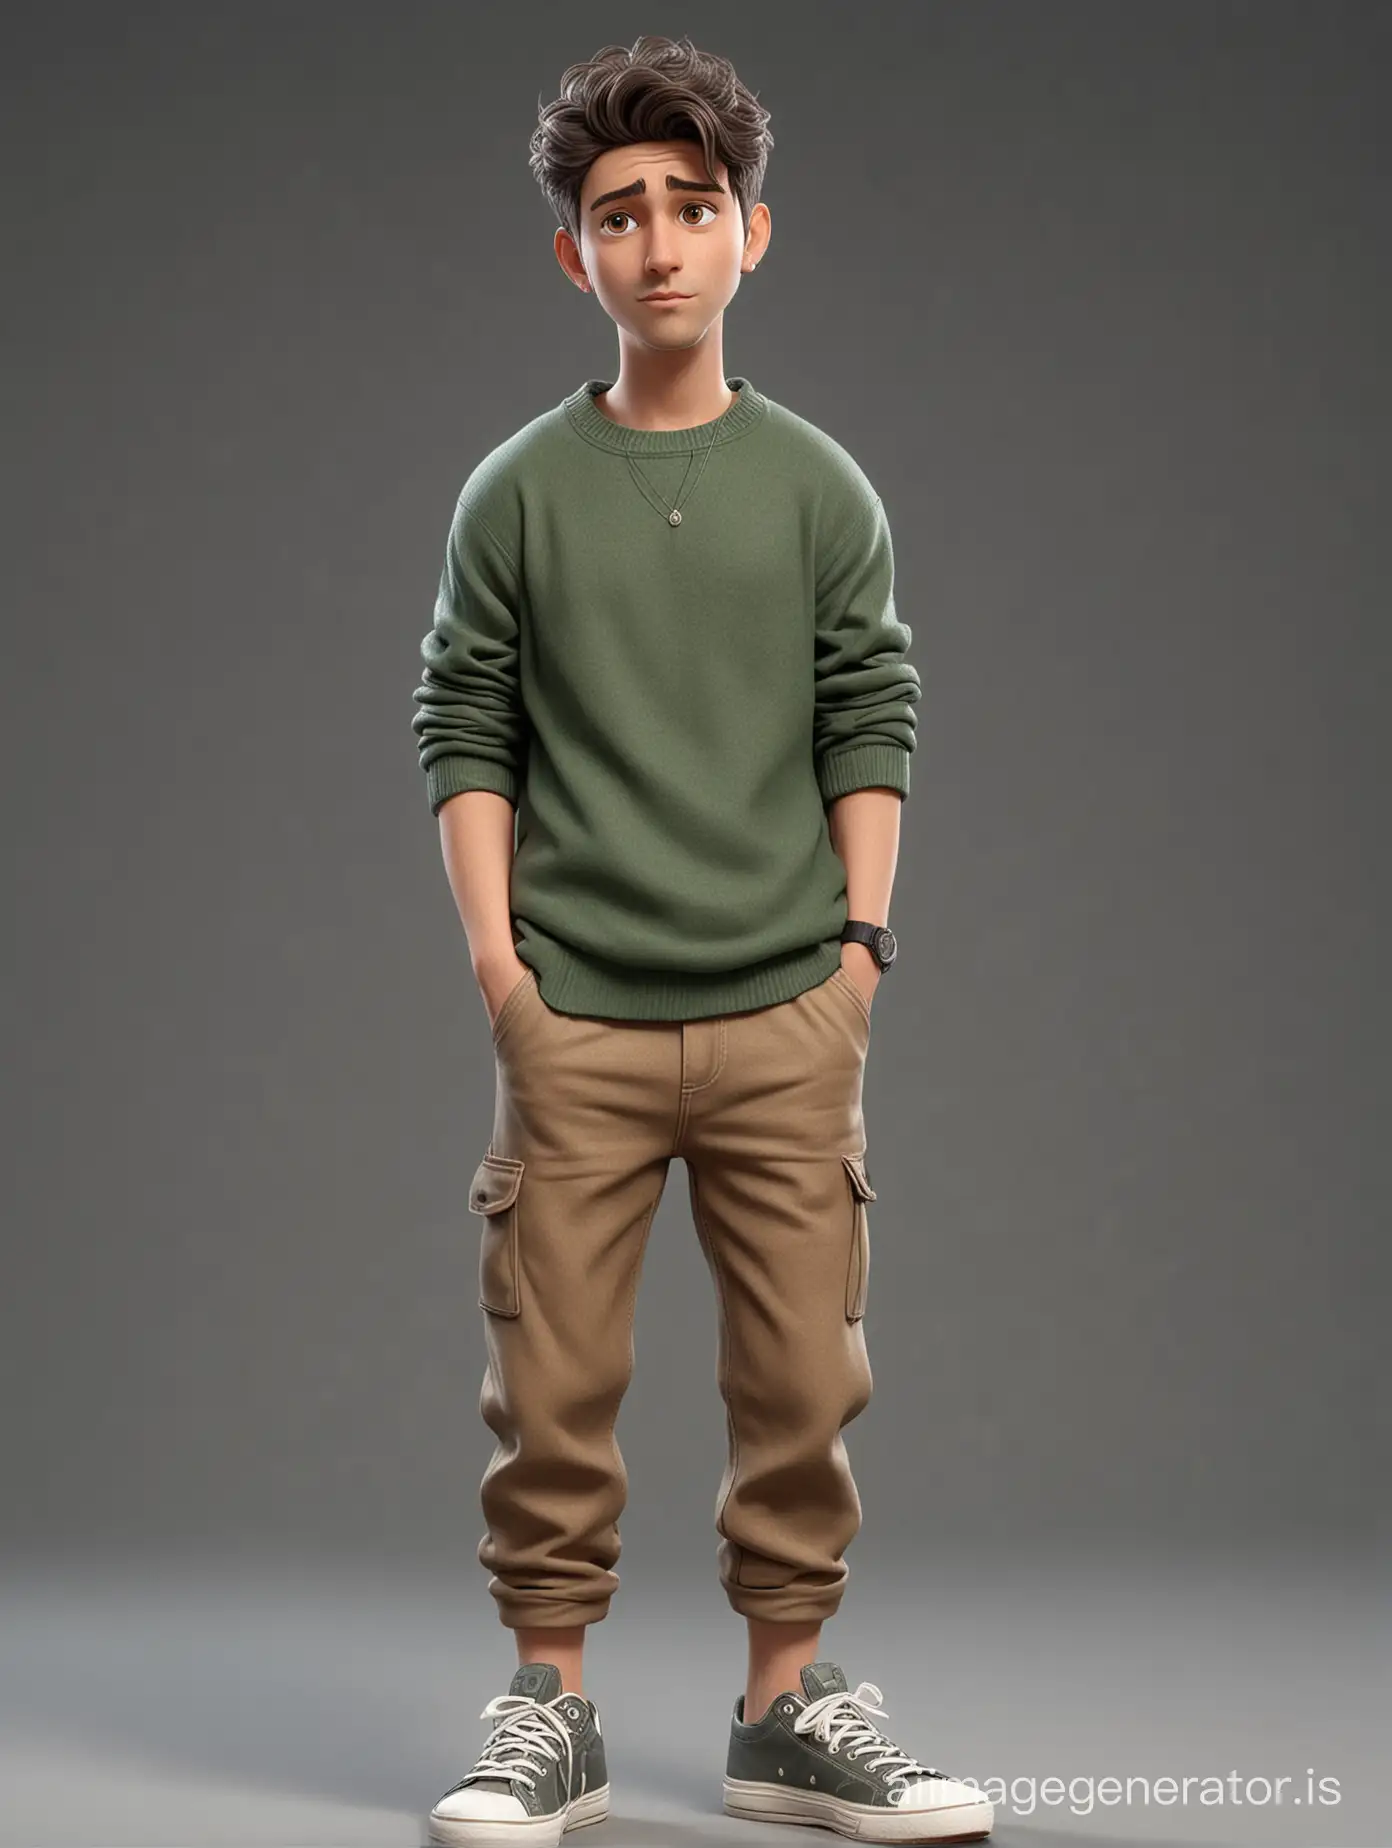 Cartoon-Style-Skeptical-Man-in-Loose-Sweater-and-Khaki-Jeans